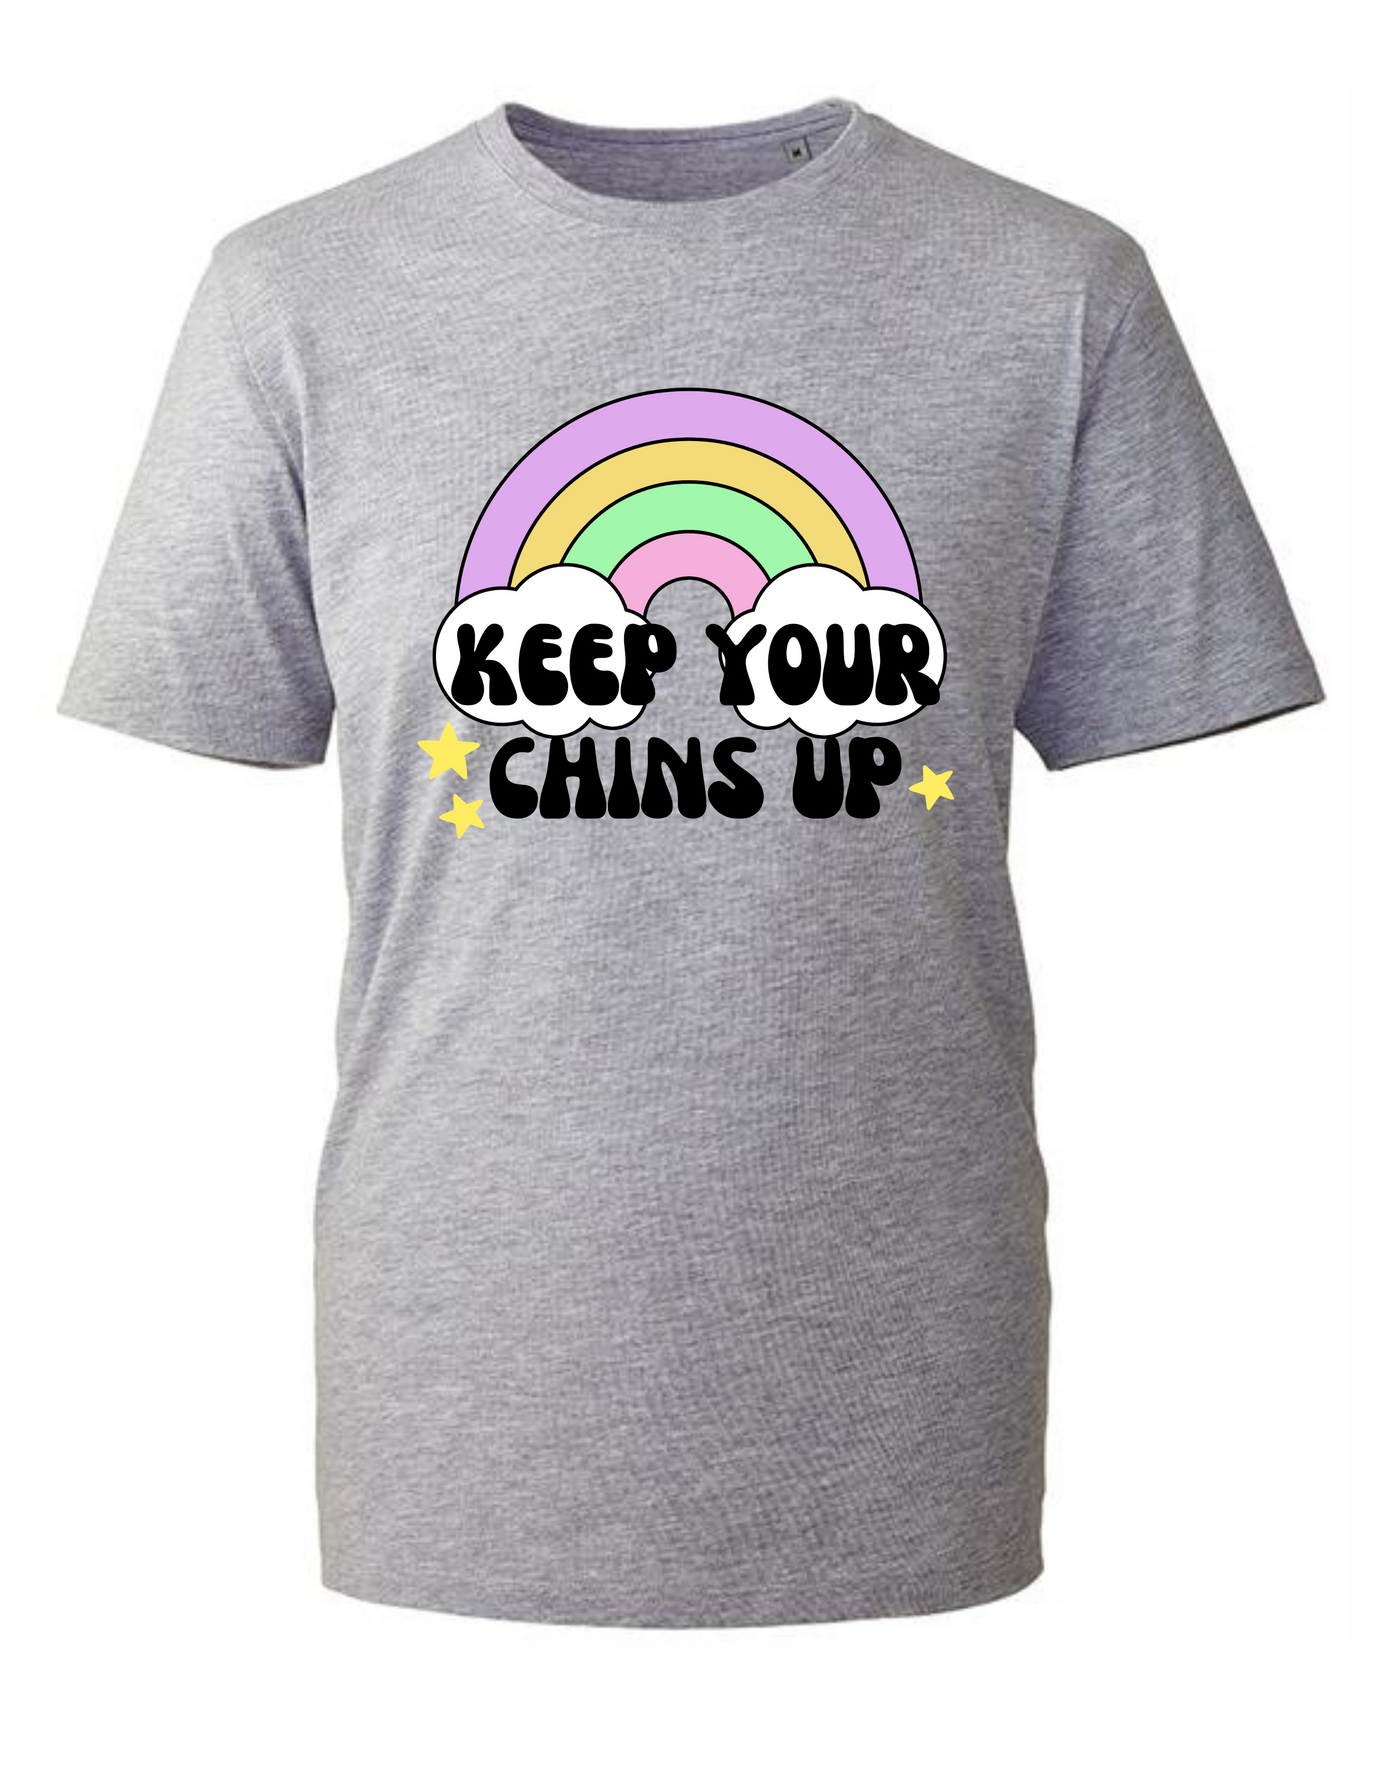 "Keep Your Chins Up" Unisex Organic T-Shirt